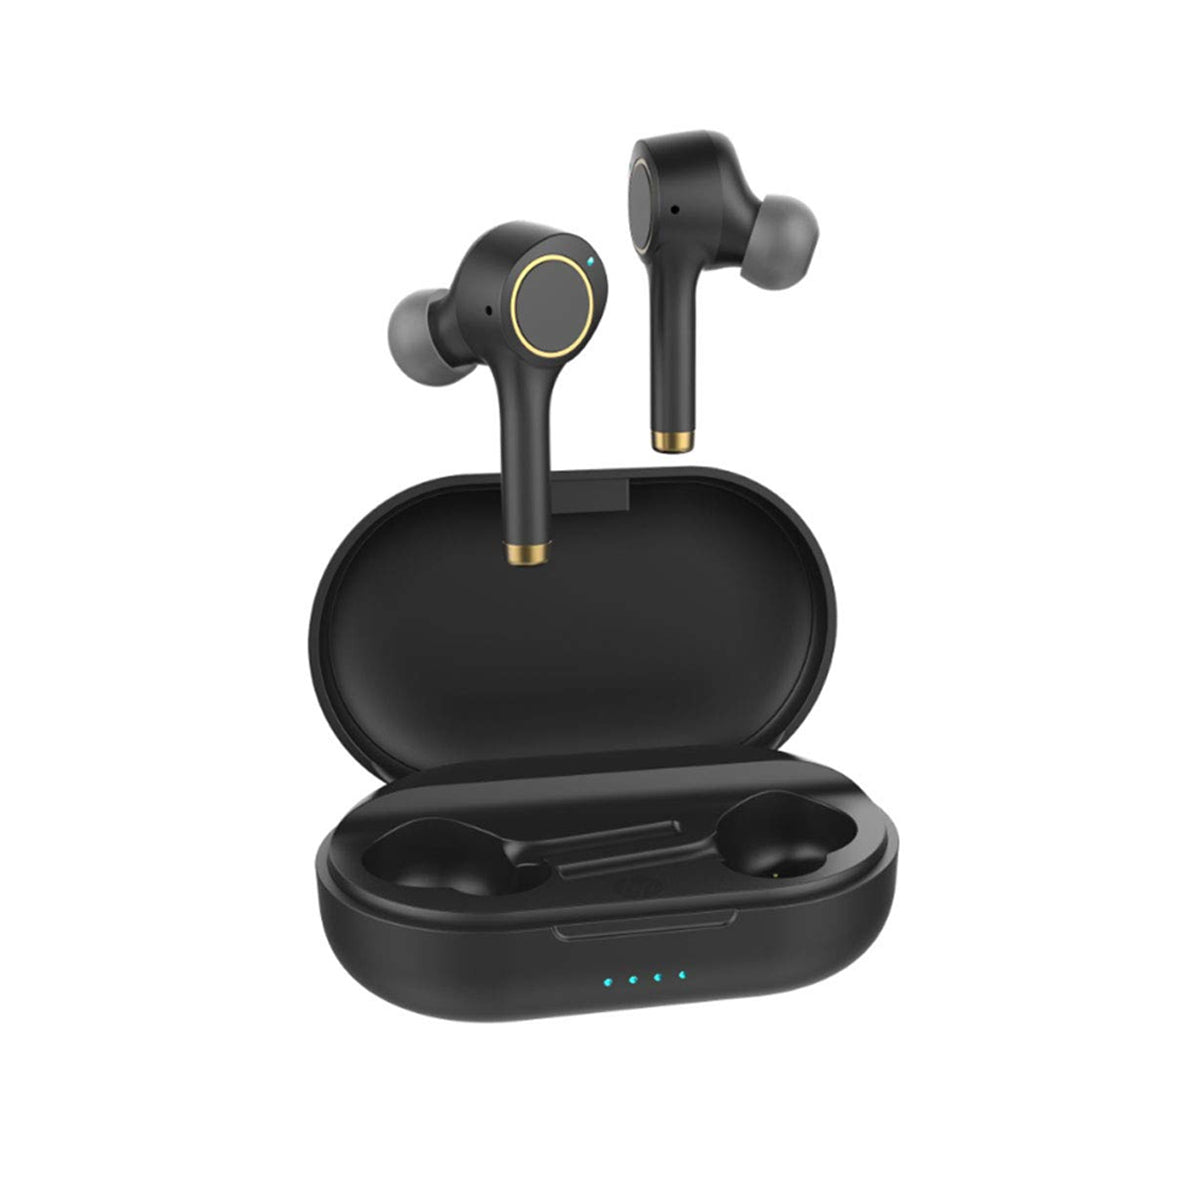 HP H10 Pro True Wireless Earbuds with Microphone 16 Hour Battery Backup and USB-C